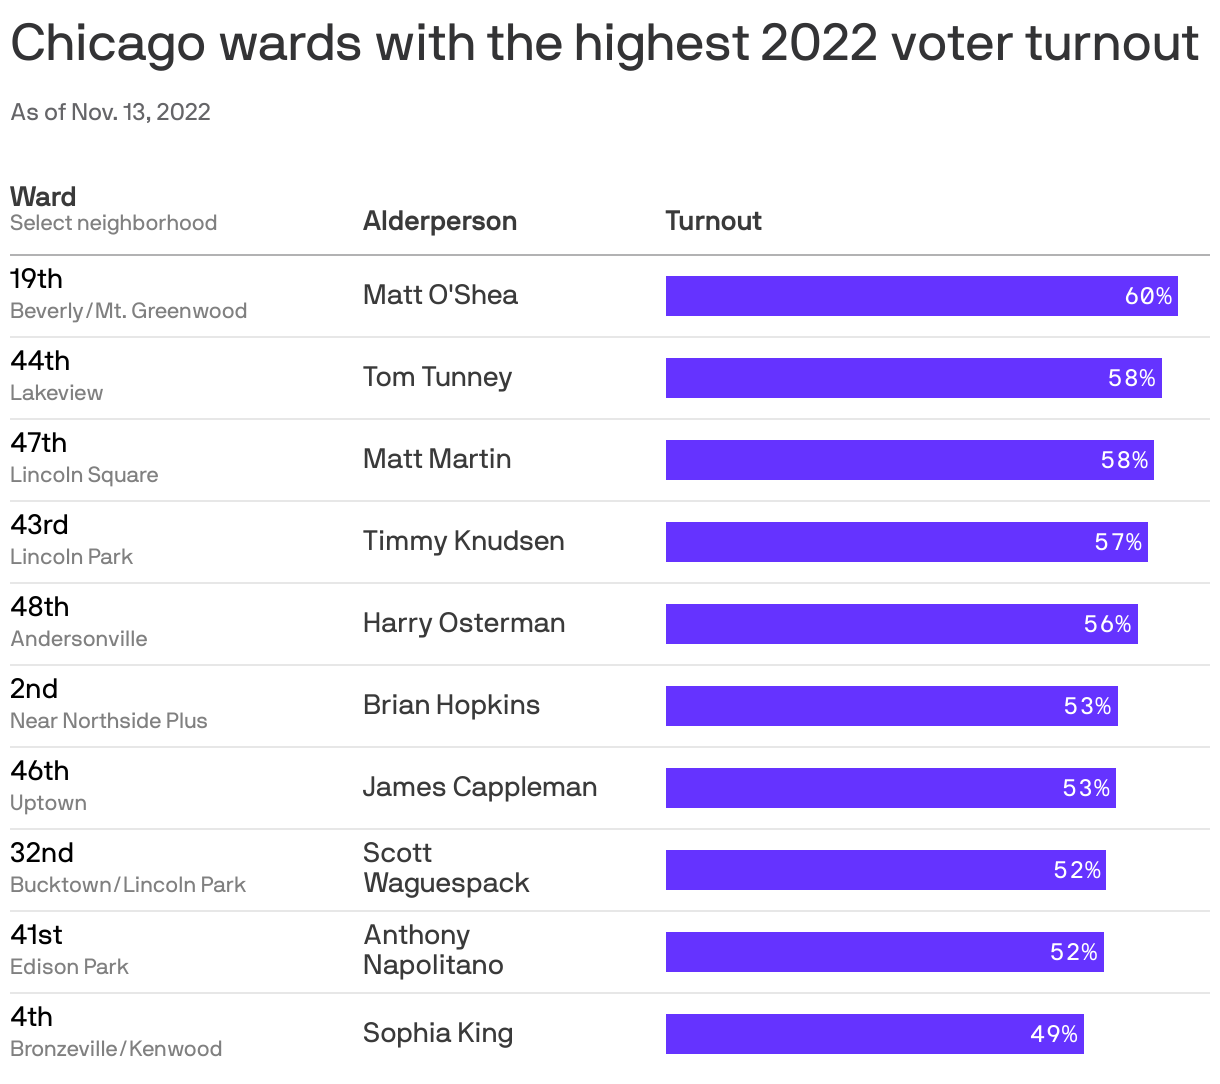 Chicago wards with the highest 2022 voter turnout